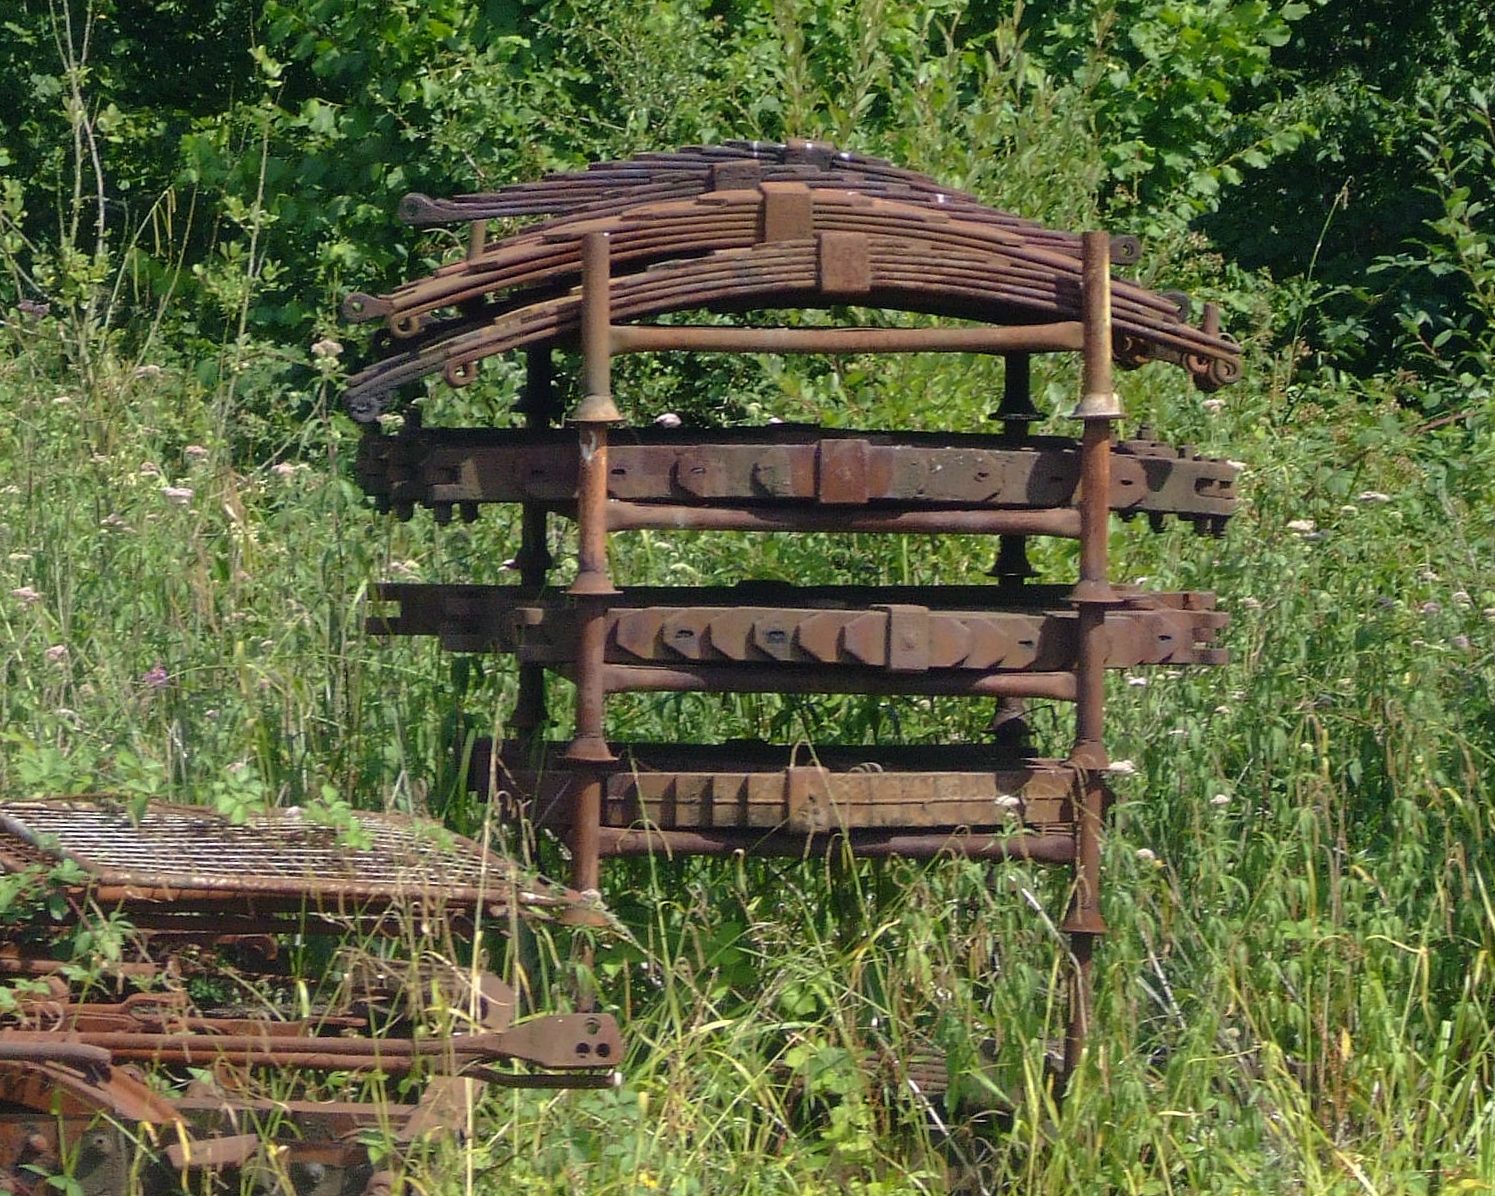 there are many old wood structures in the grass